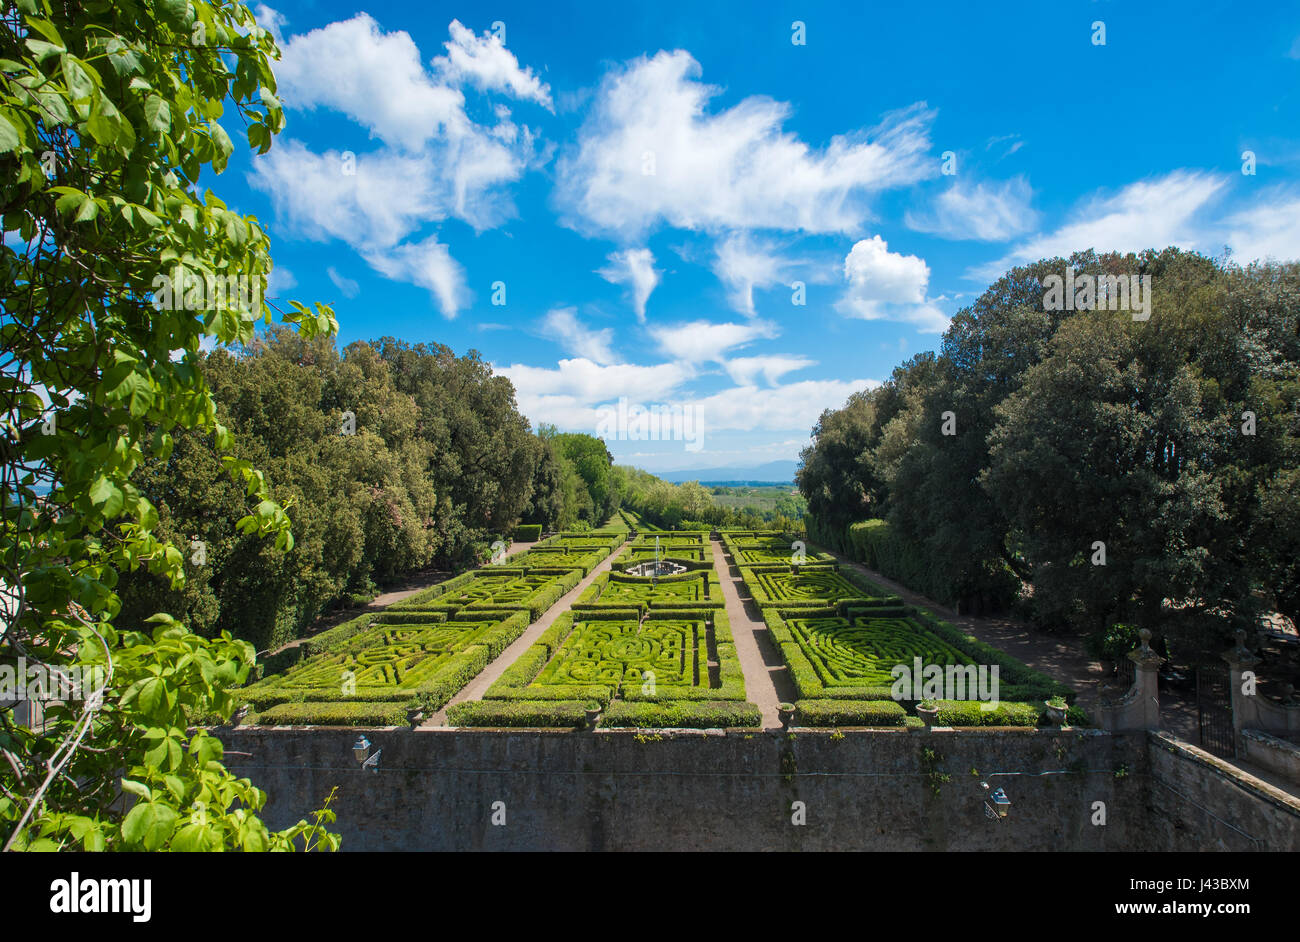 Vignanello, Italy - The Ruspoli Castle in the historic center of the little medieval town in Tuscia. This noble residence has an awesome garden Stock Photo